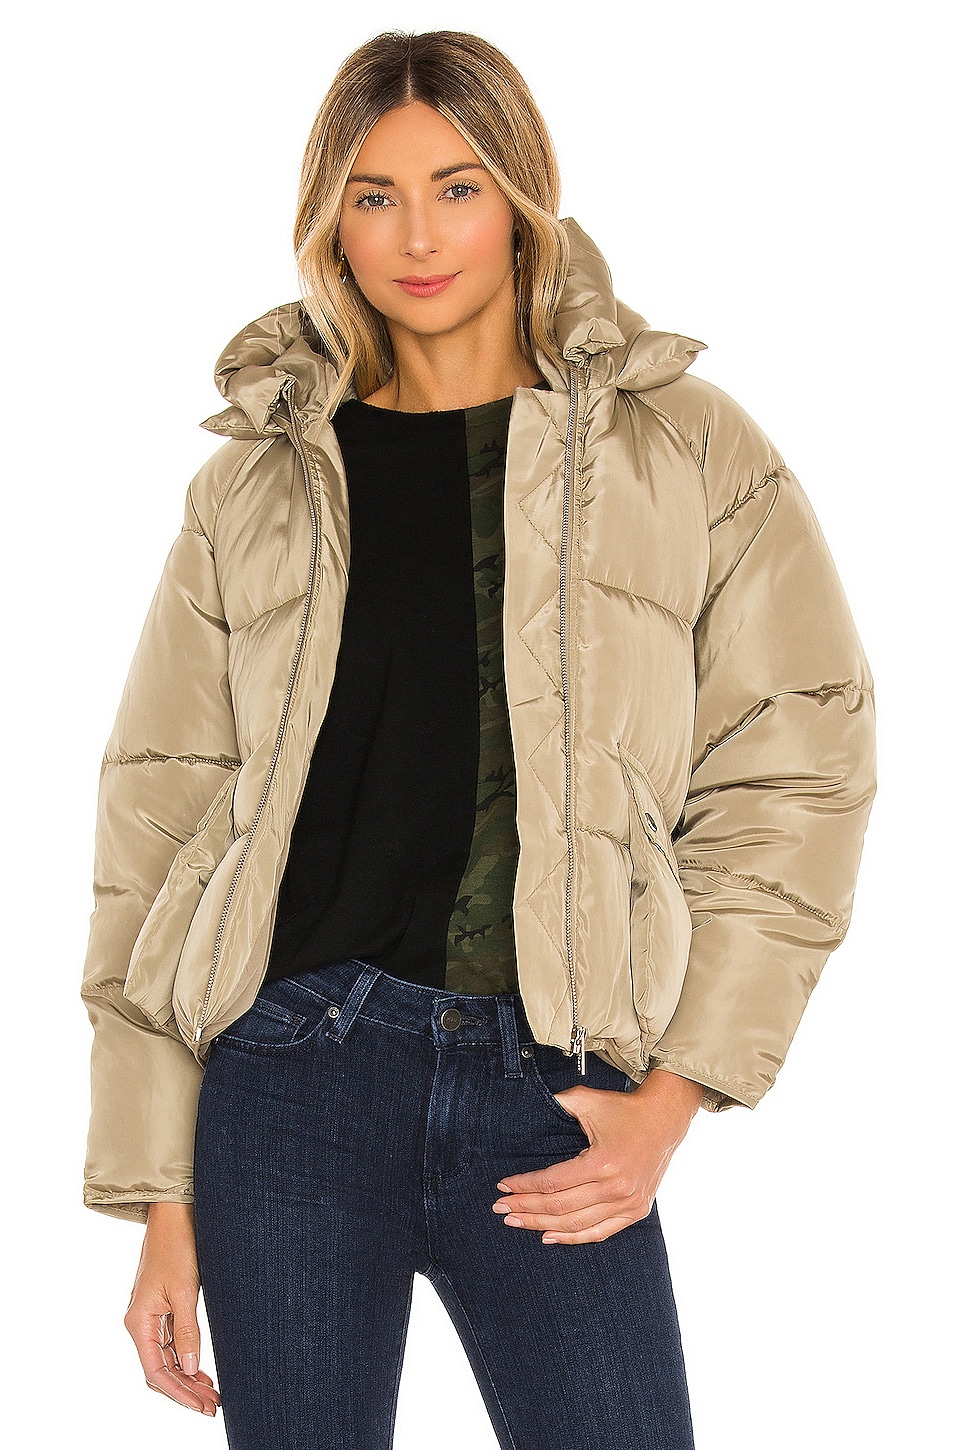 Toast Society Pluto Puffer Jacket in Fawn